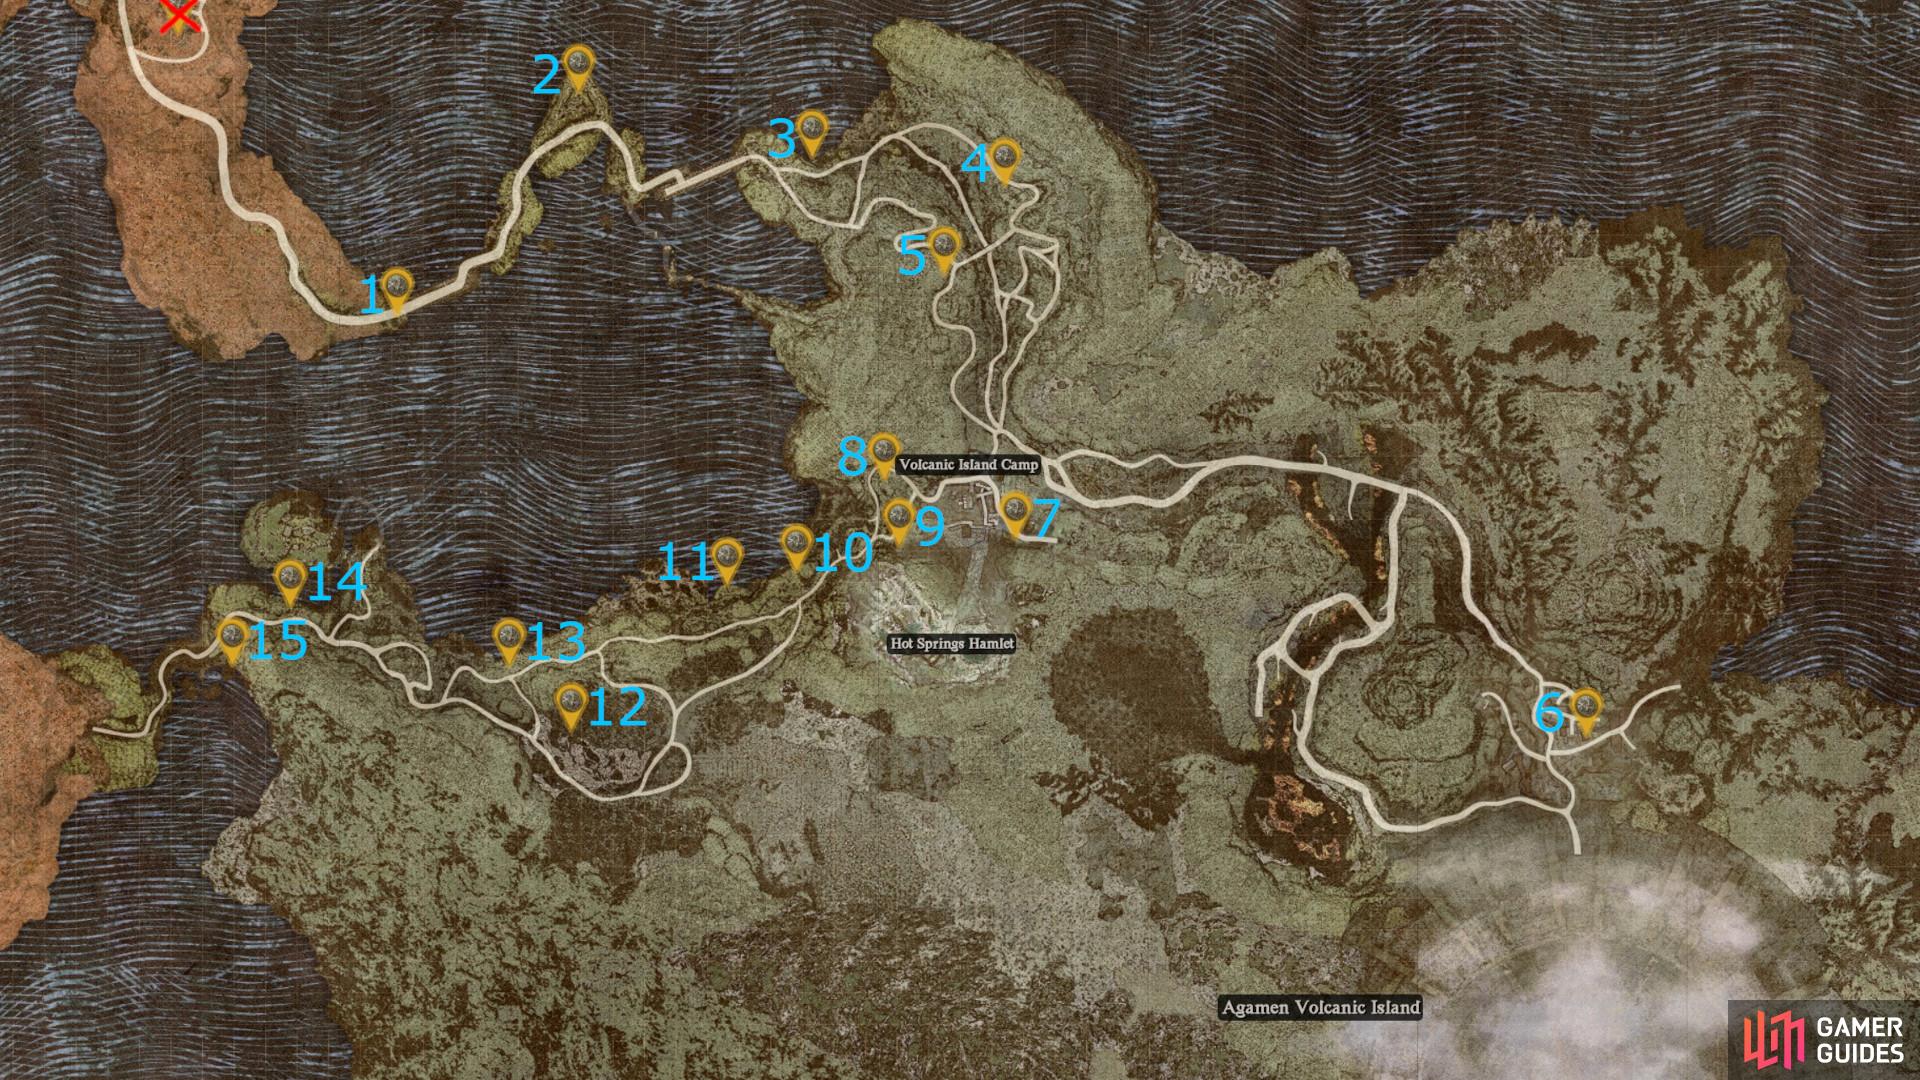 Here are all the Seeker’s Token locations in the Volcanic Island that we know of. This should now tick you over the fabled 220 Seeker’s Tokens to get the final rewards.